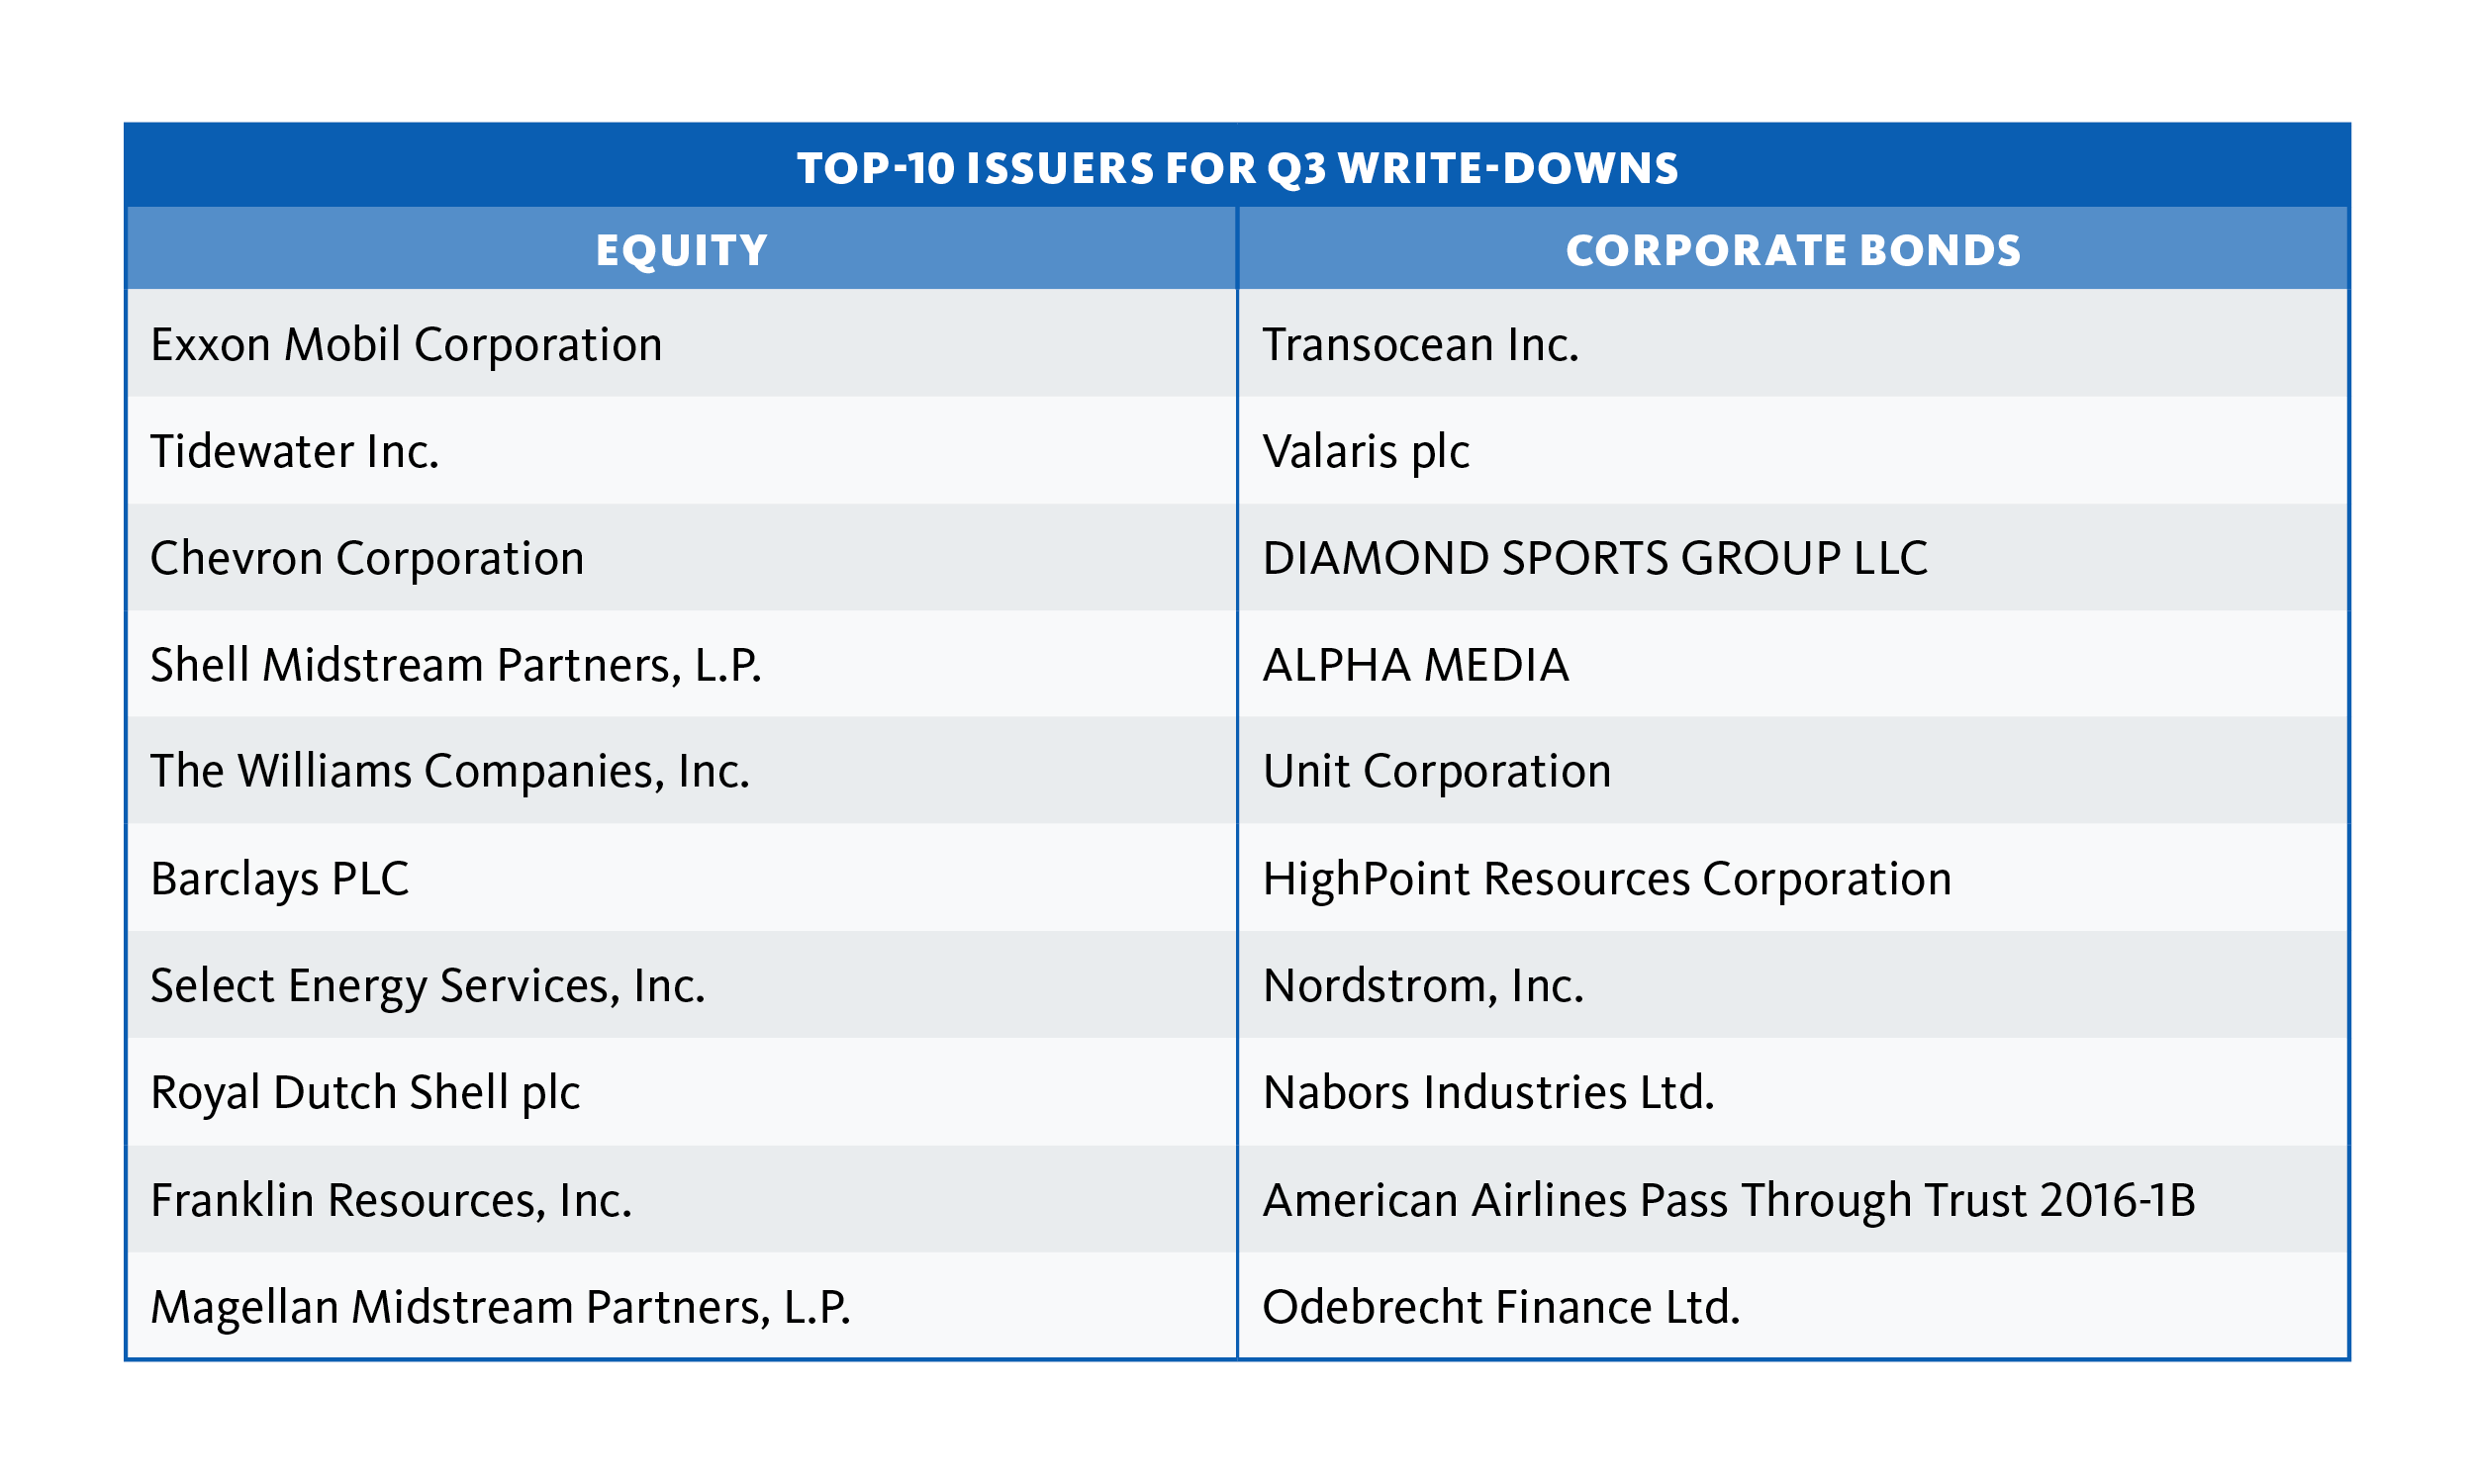 Top 10 issuers